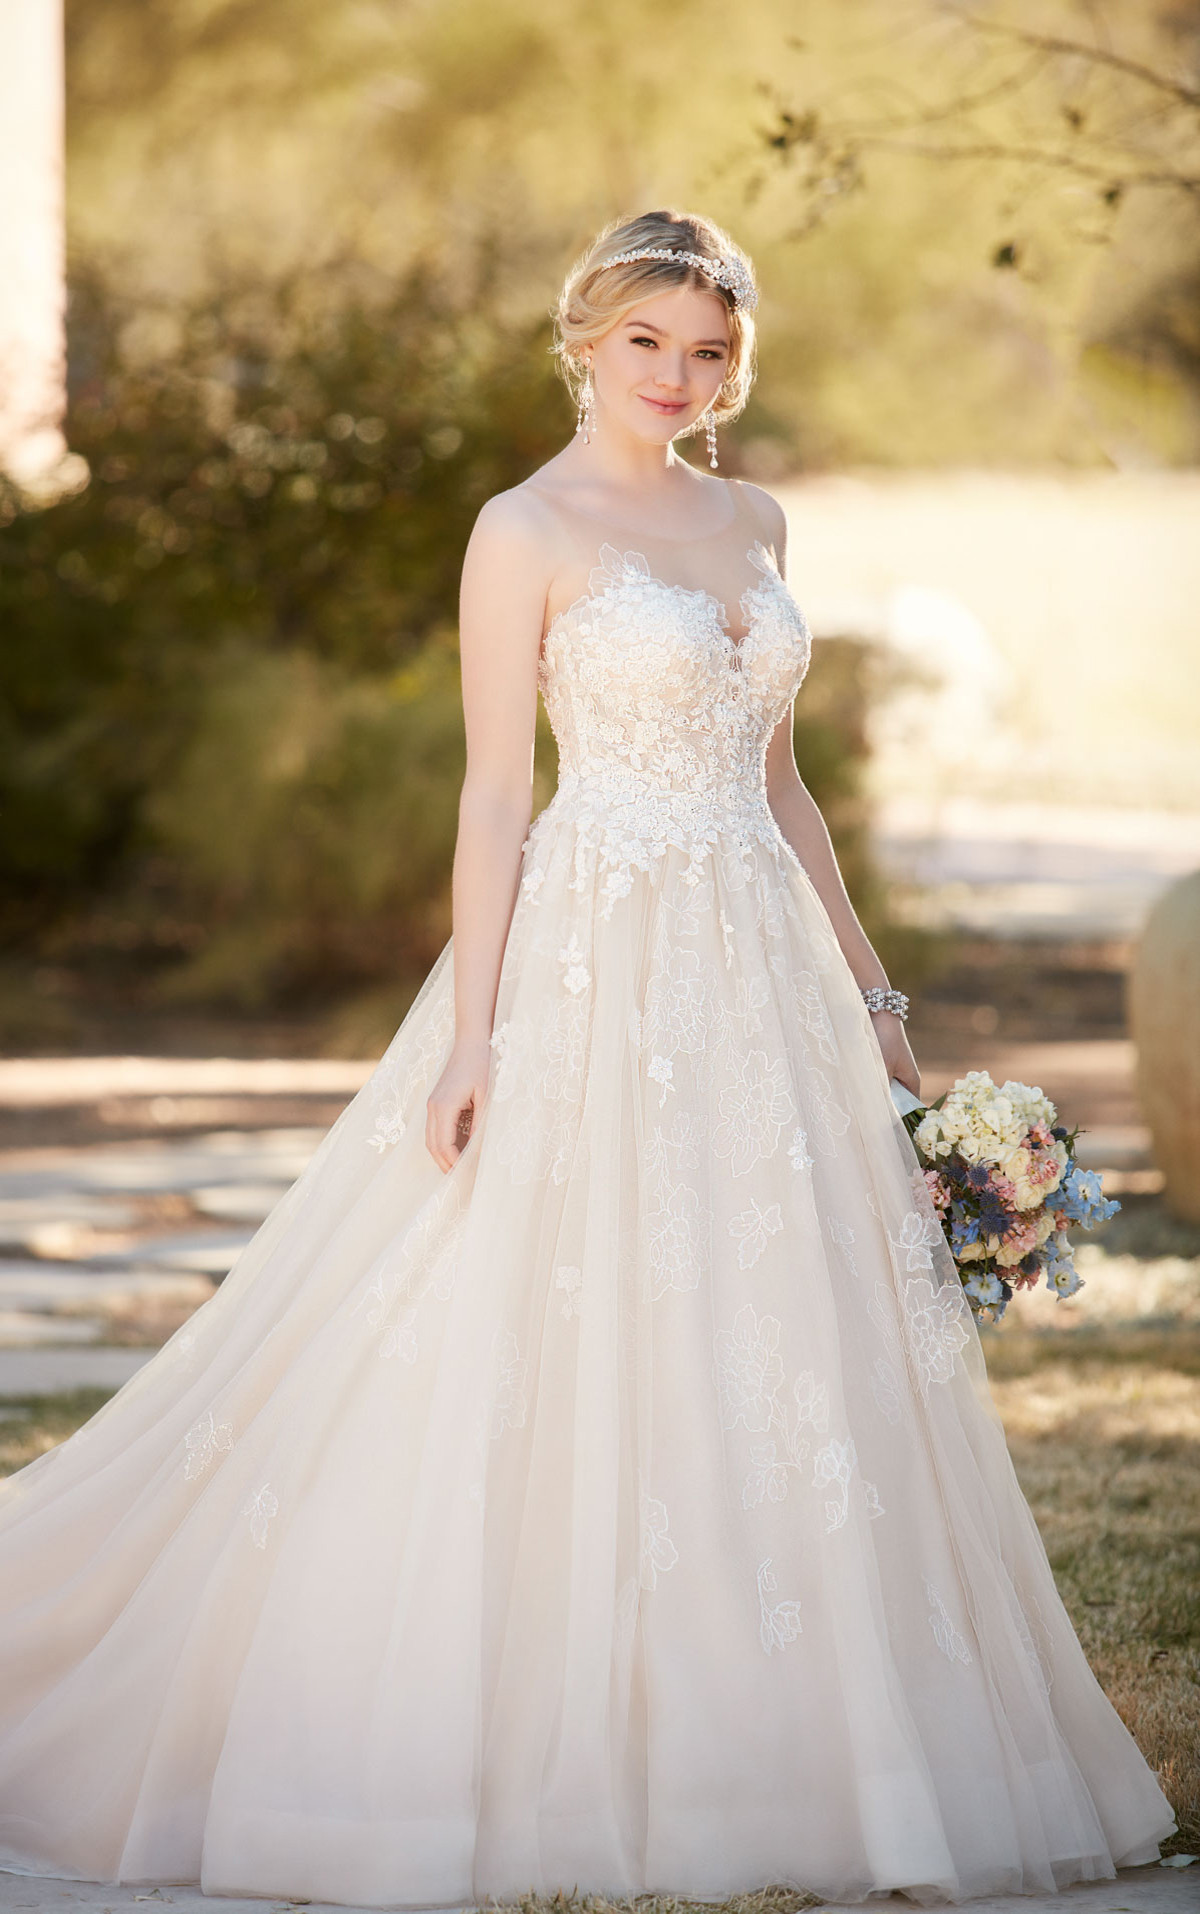 Wedding Ball Gowns
 Ball Gown Wedding Dress with Tulle Skirt